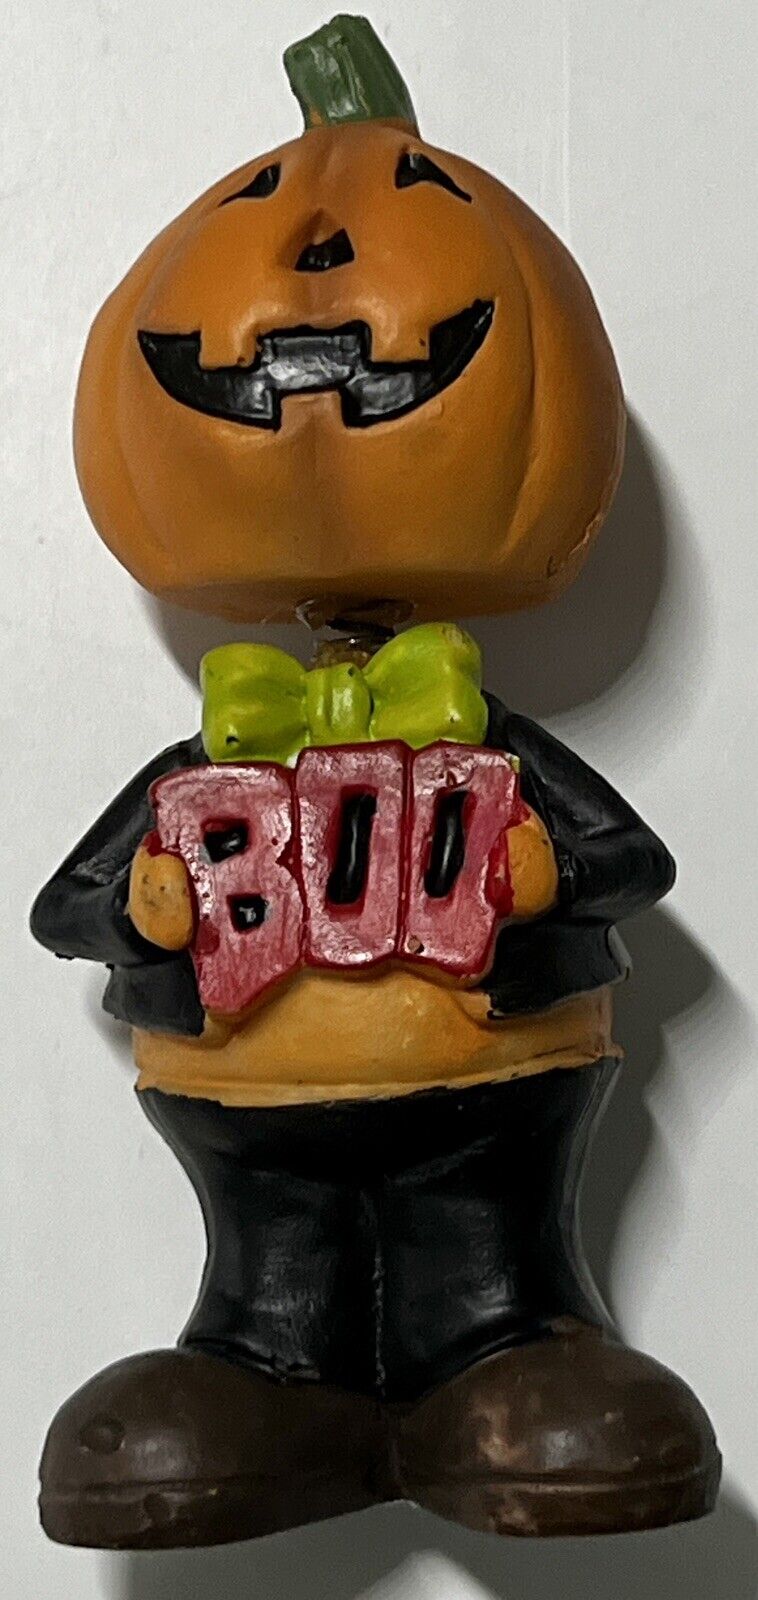 Vintage Greenbriar Halloween Bobblehead Pumpkin Excel. Used Condition 5-1/4”T